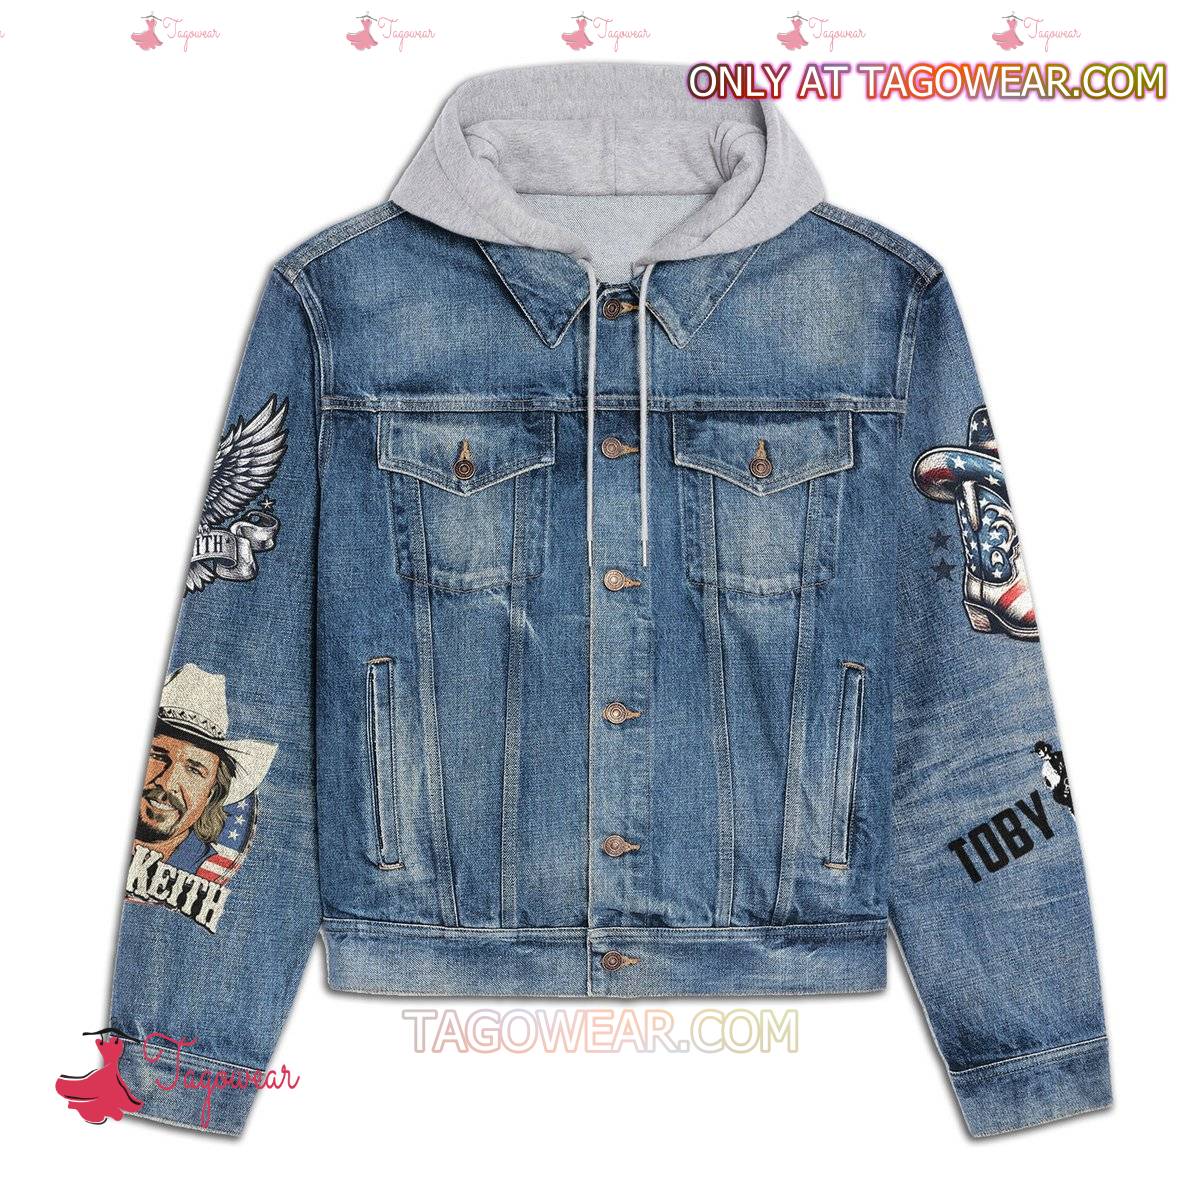 Toby Keith Raise Em High For Toby Jean Hoodie Jacket - Tagowear